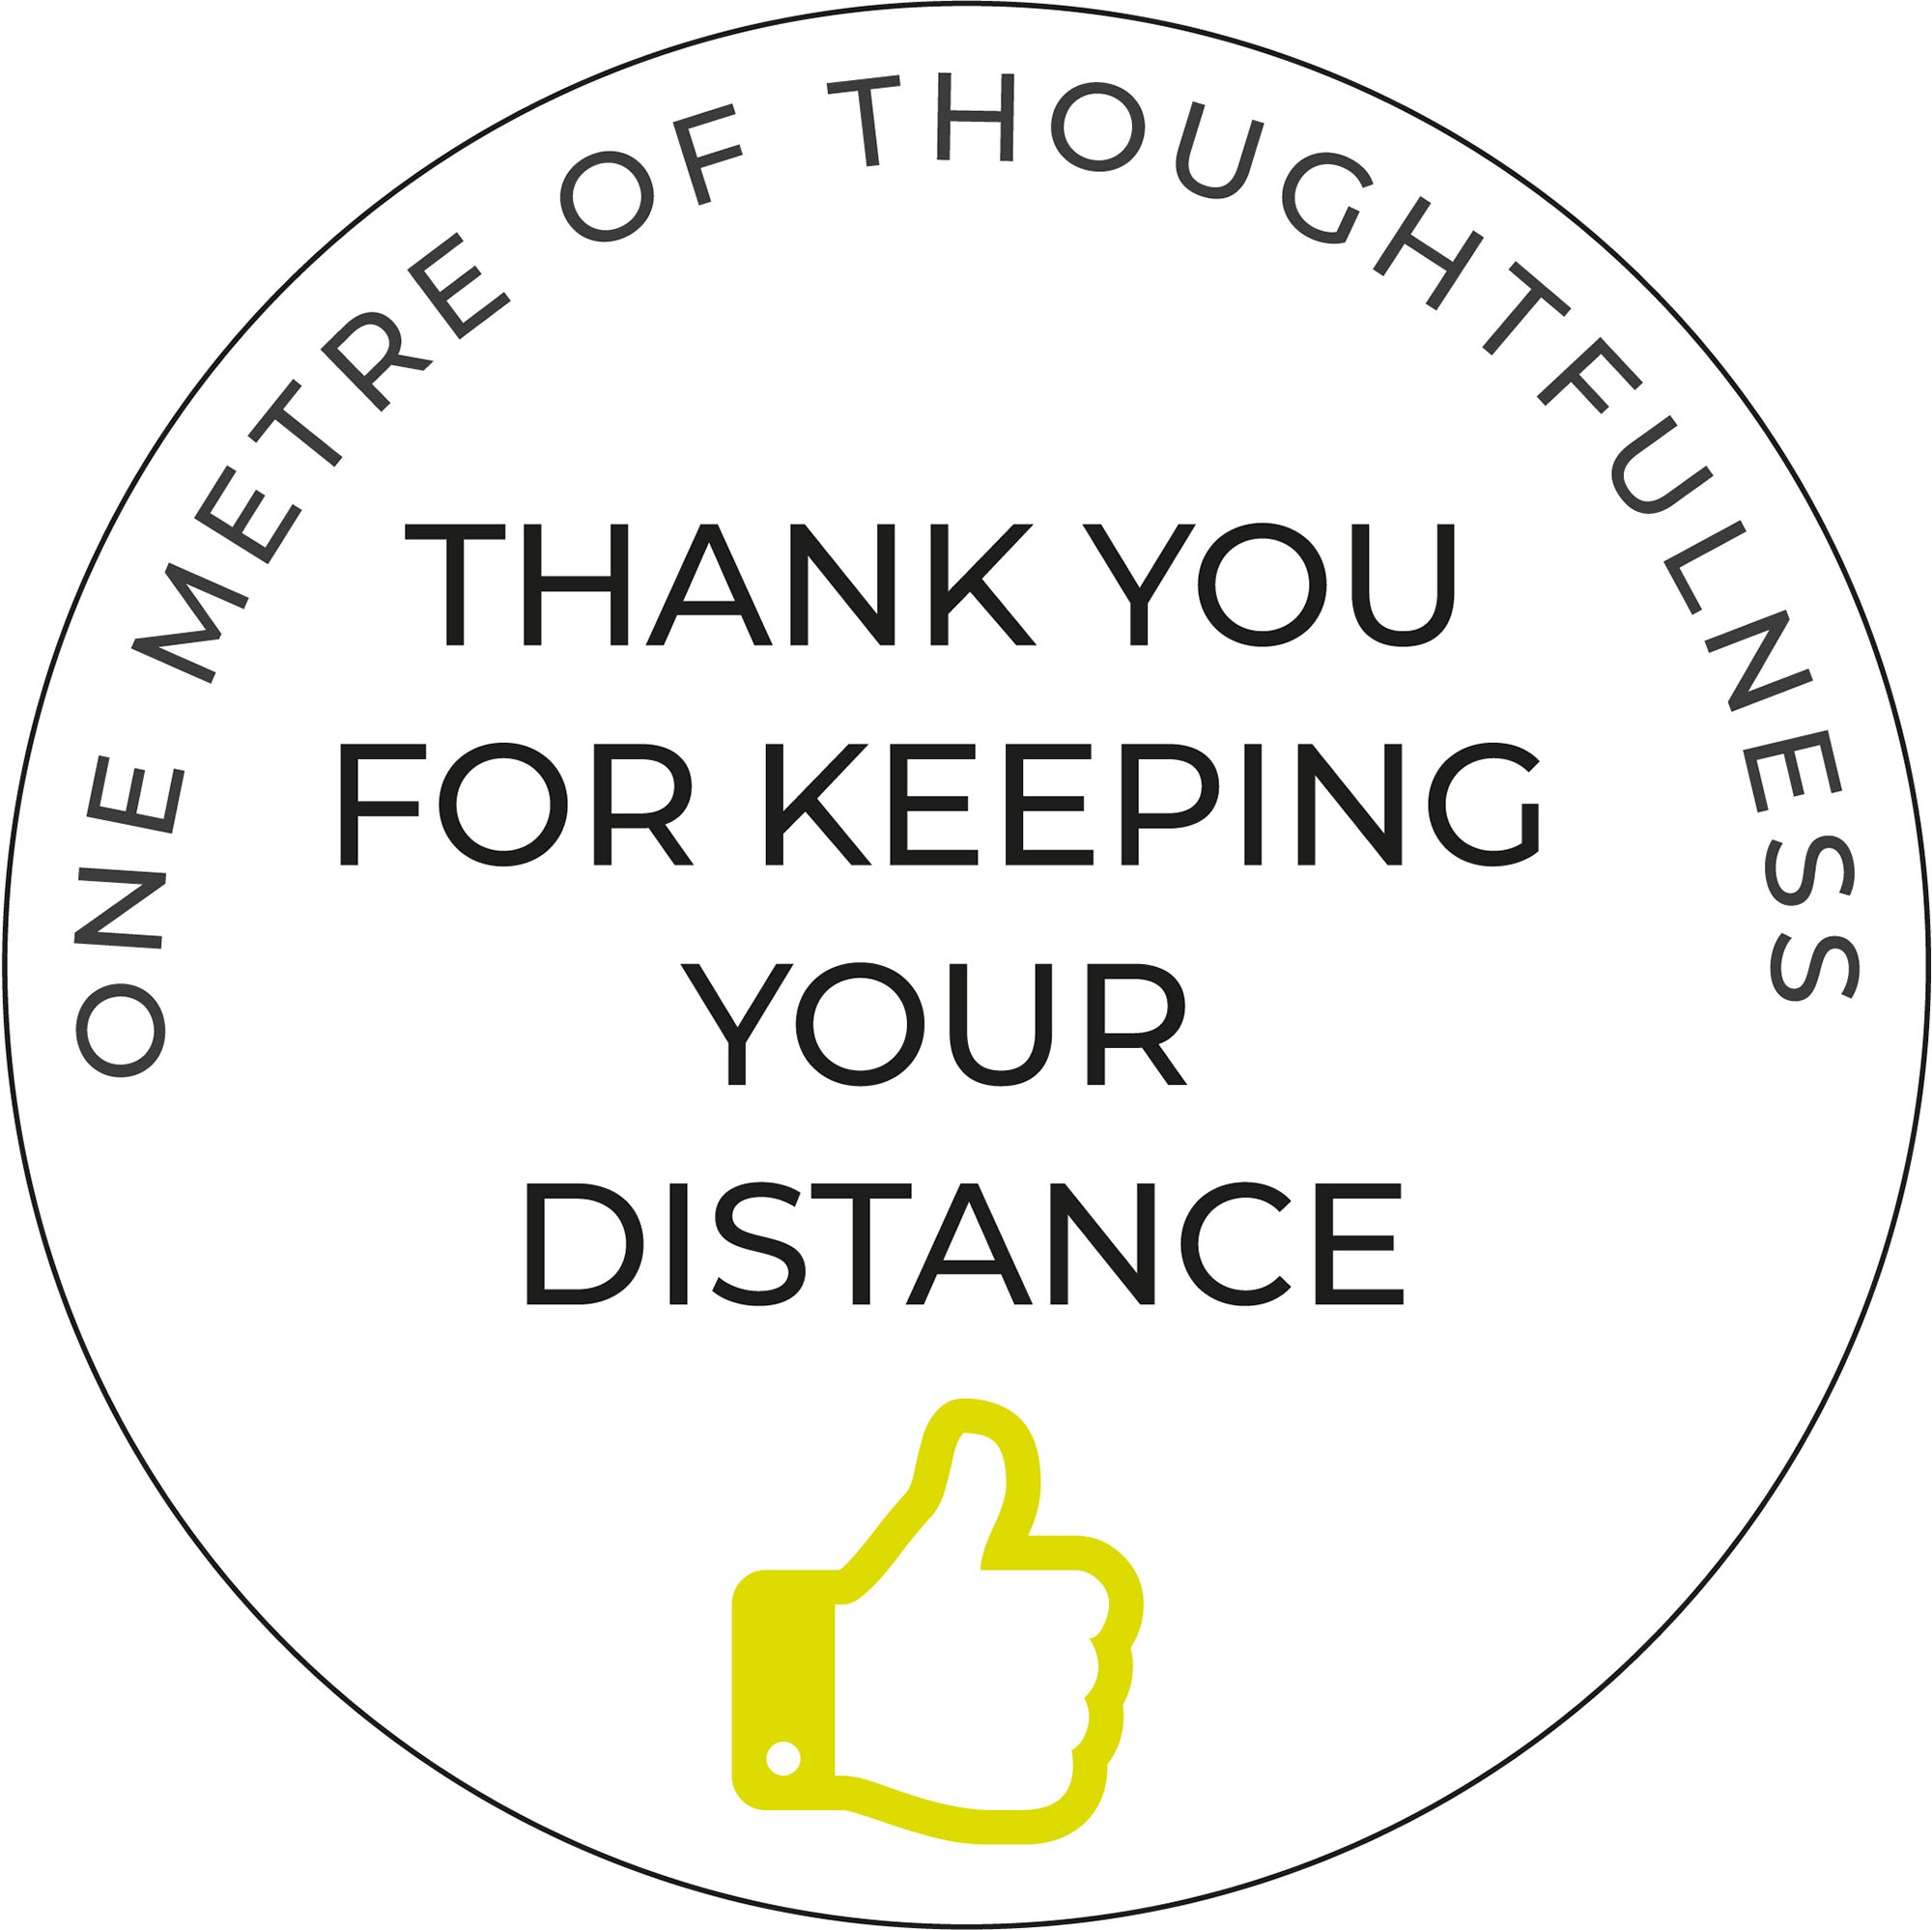 Thank you for keeping your distance